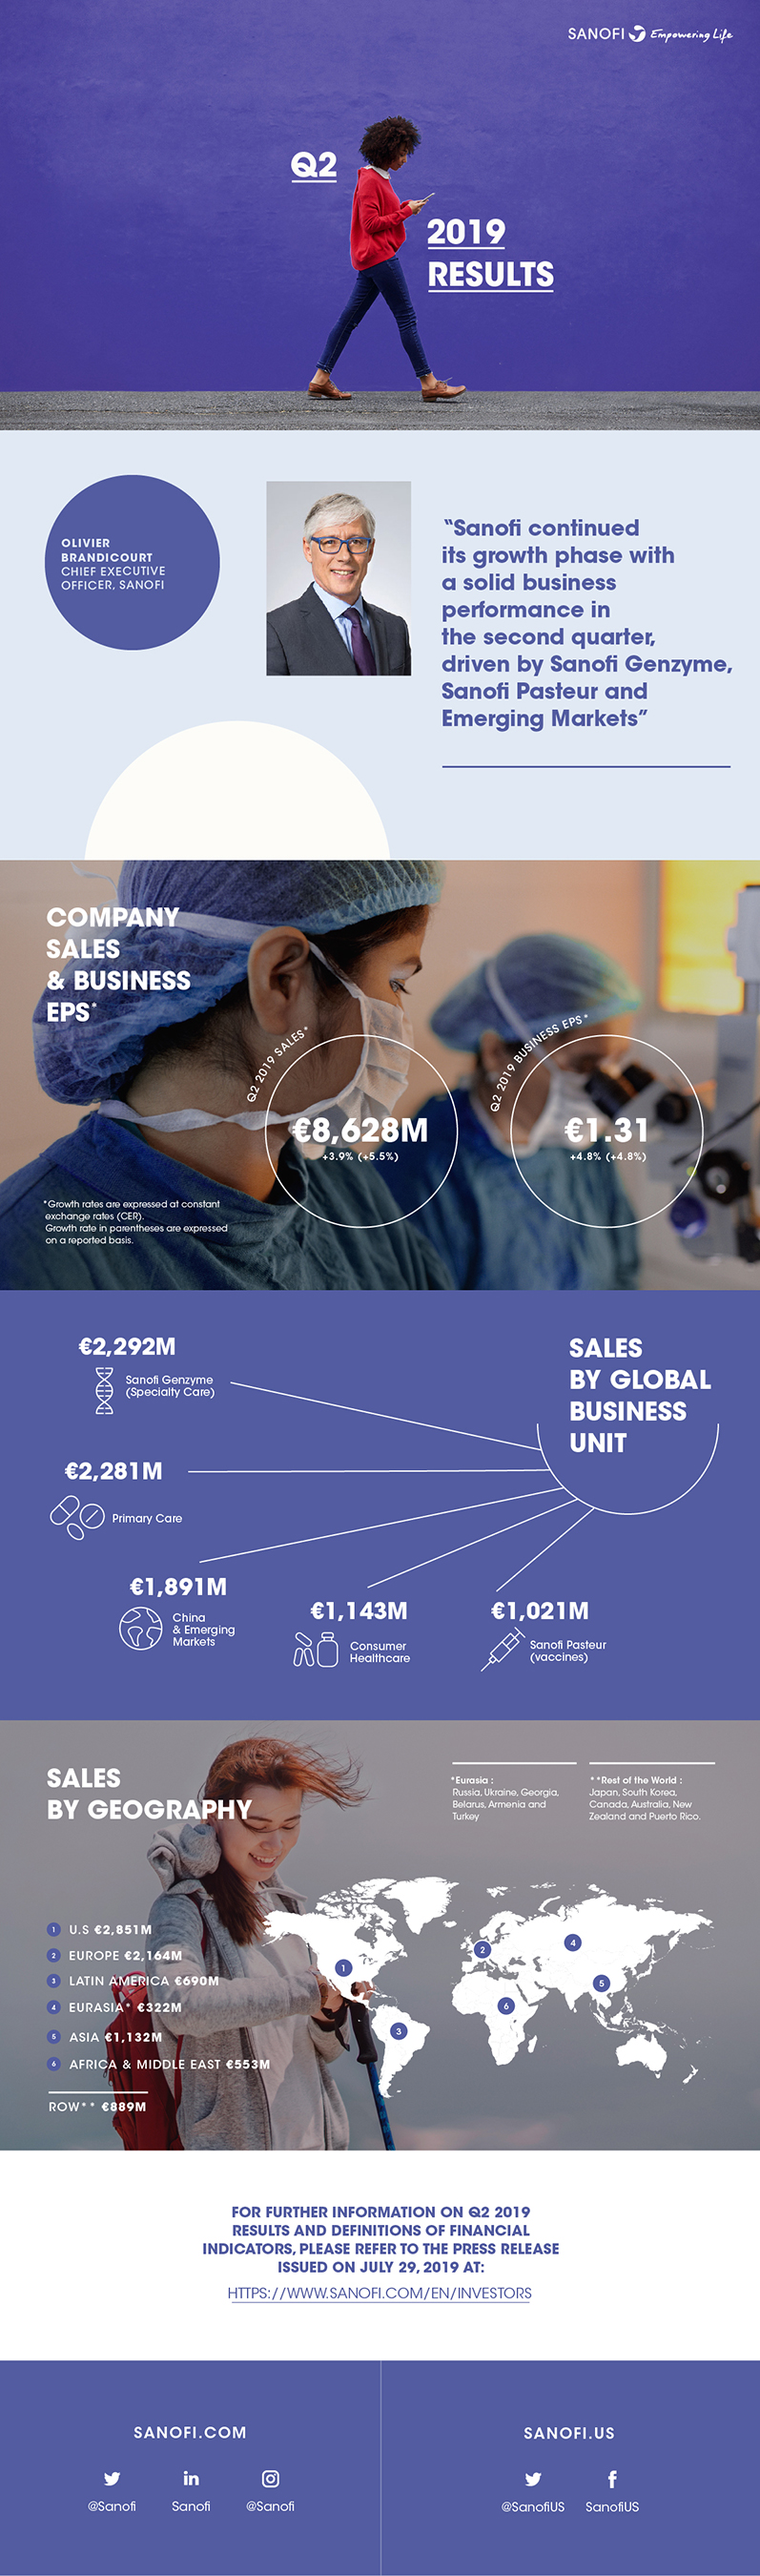 Sanofi delivered solid growth in Q2 2019